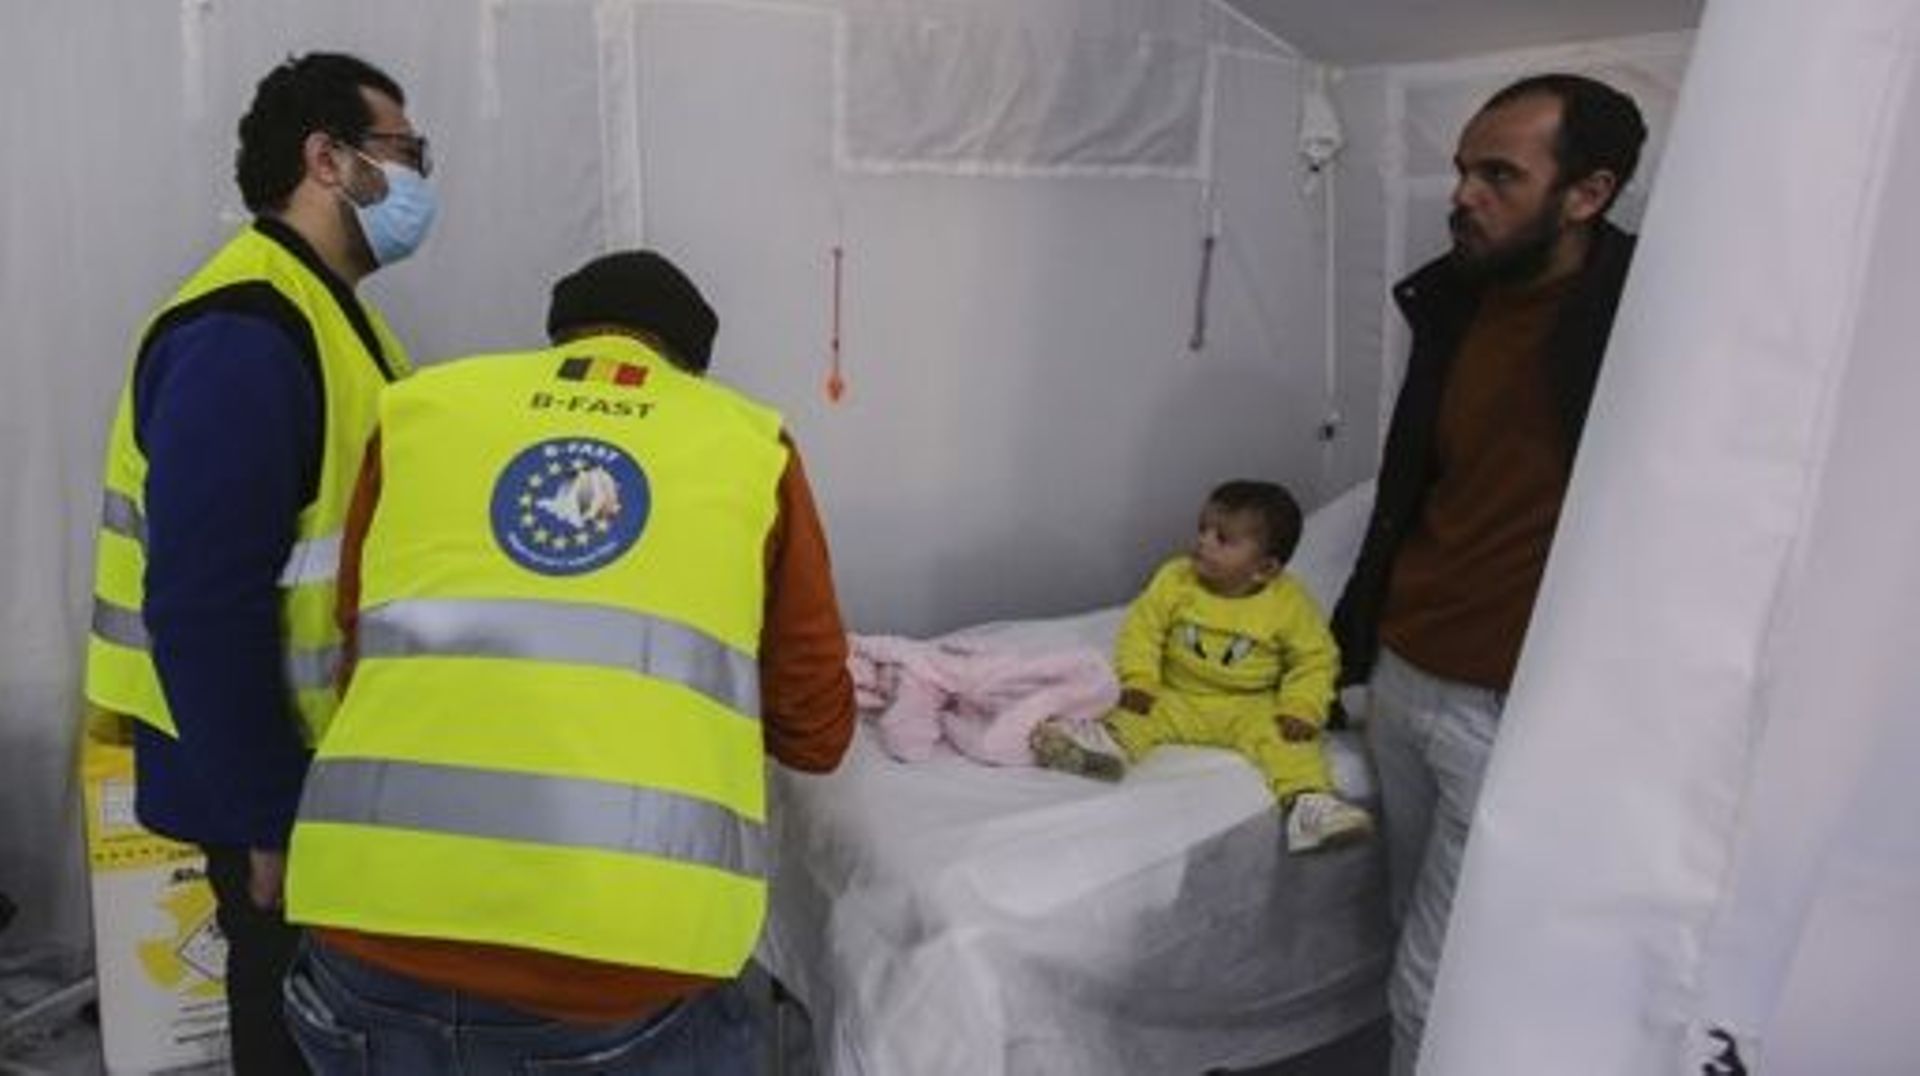 Illustration picture shows a field hospital in Kirikhan, Turkey, built by Belgian governmental aid organization B-Fast (Belgian First Aid and Support Team), Monday 20 February 2023. B-FAST sent a medical team to offer relief in the region struck by an ear